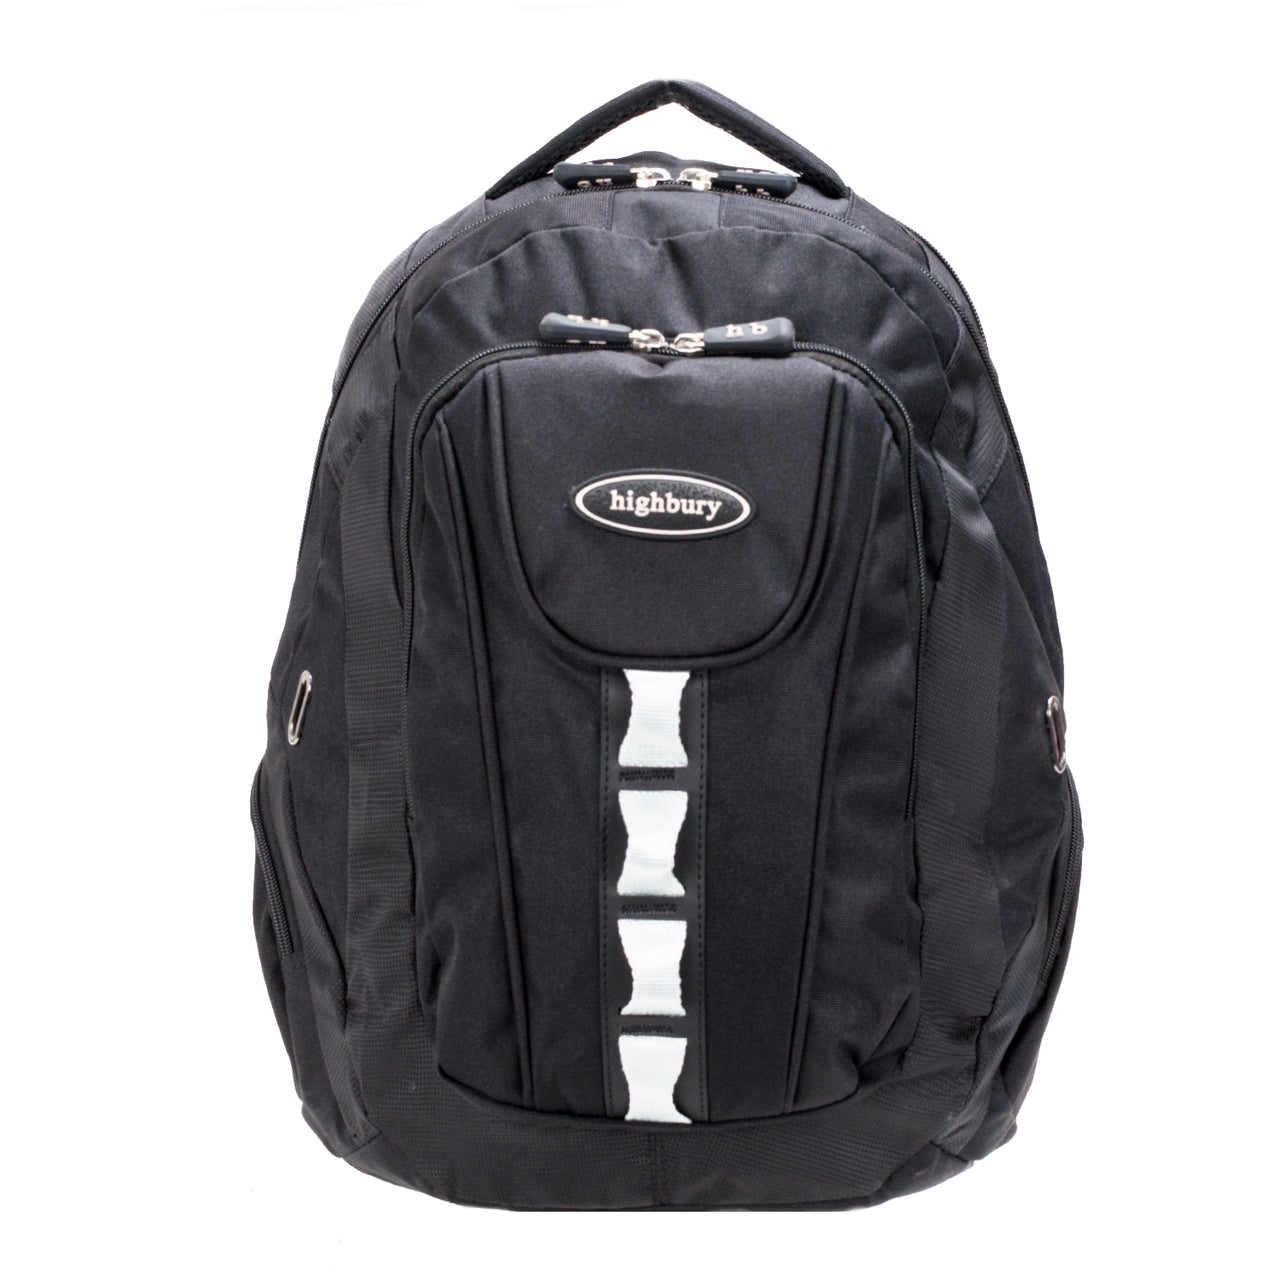 Backpack HBY-5017